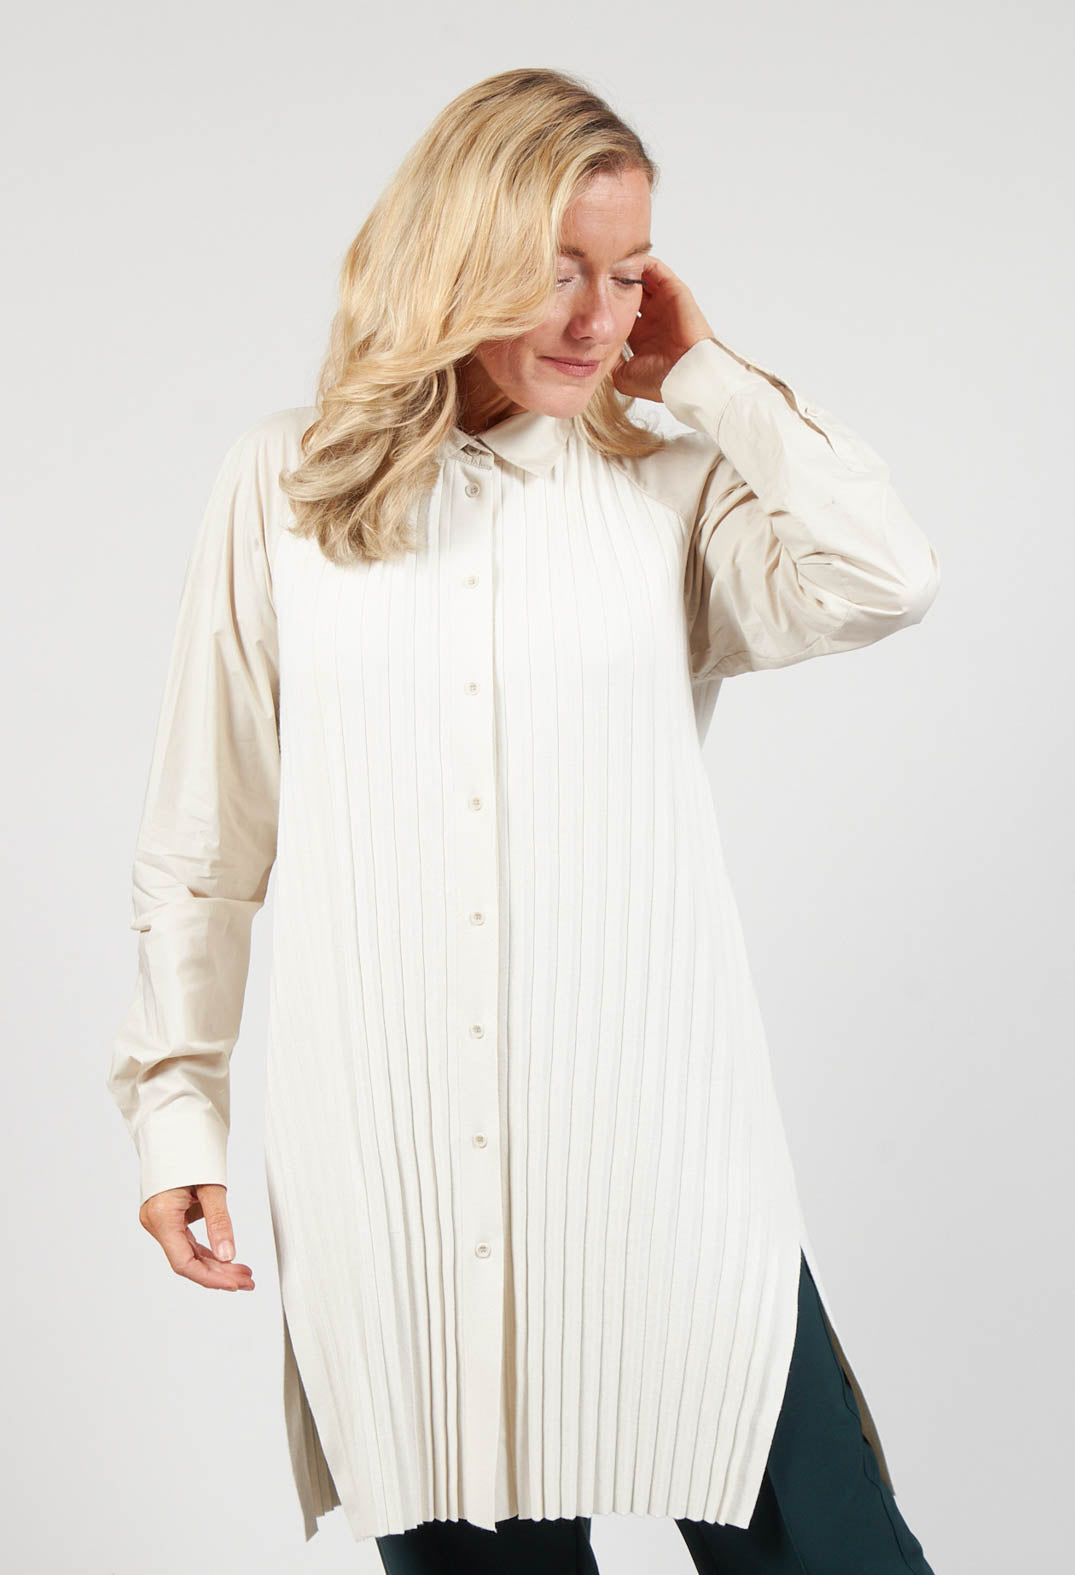 lady wearing a long sleeve blouse in dune shade